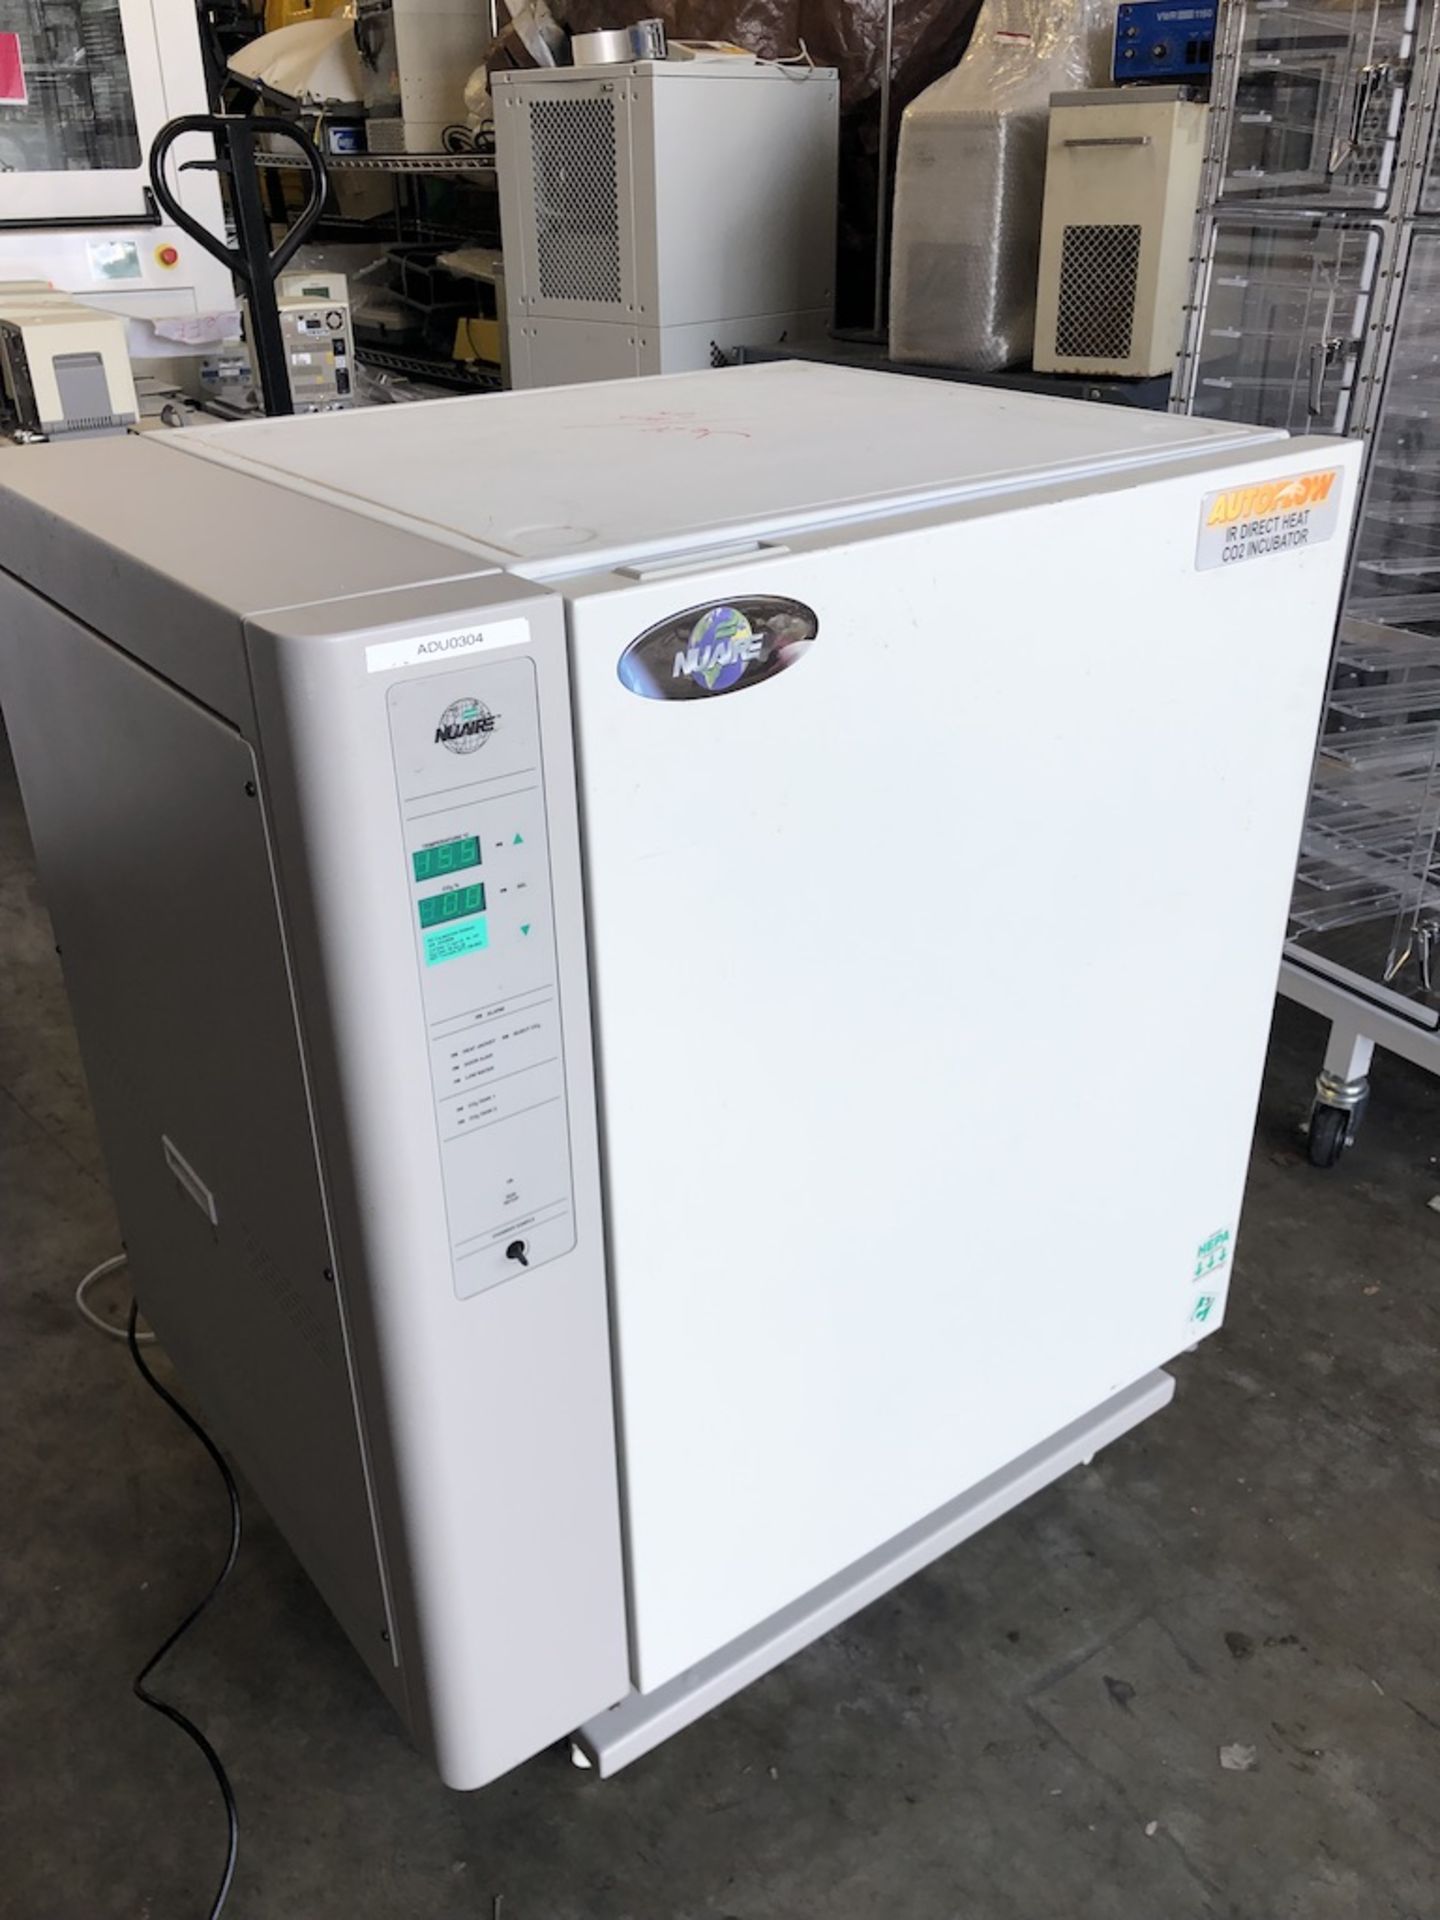 NUAIRE NU-4750 WATER JACKETED CO2 INCUBATOR SERIES 10, 115 AC, 60Hz - Image 6 of 15